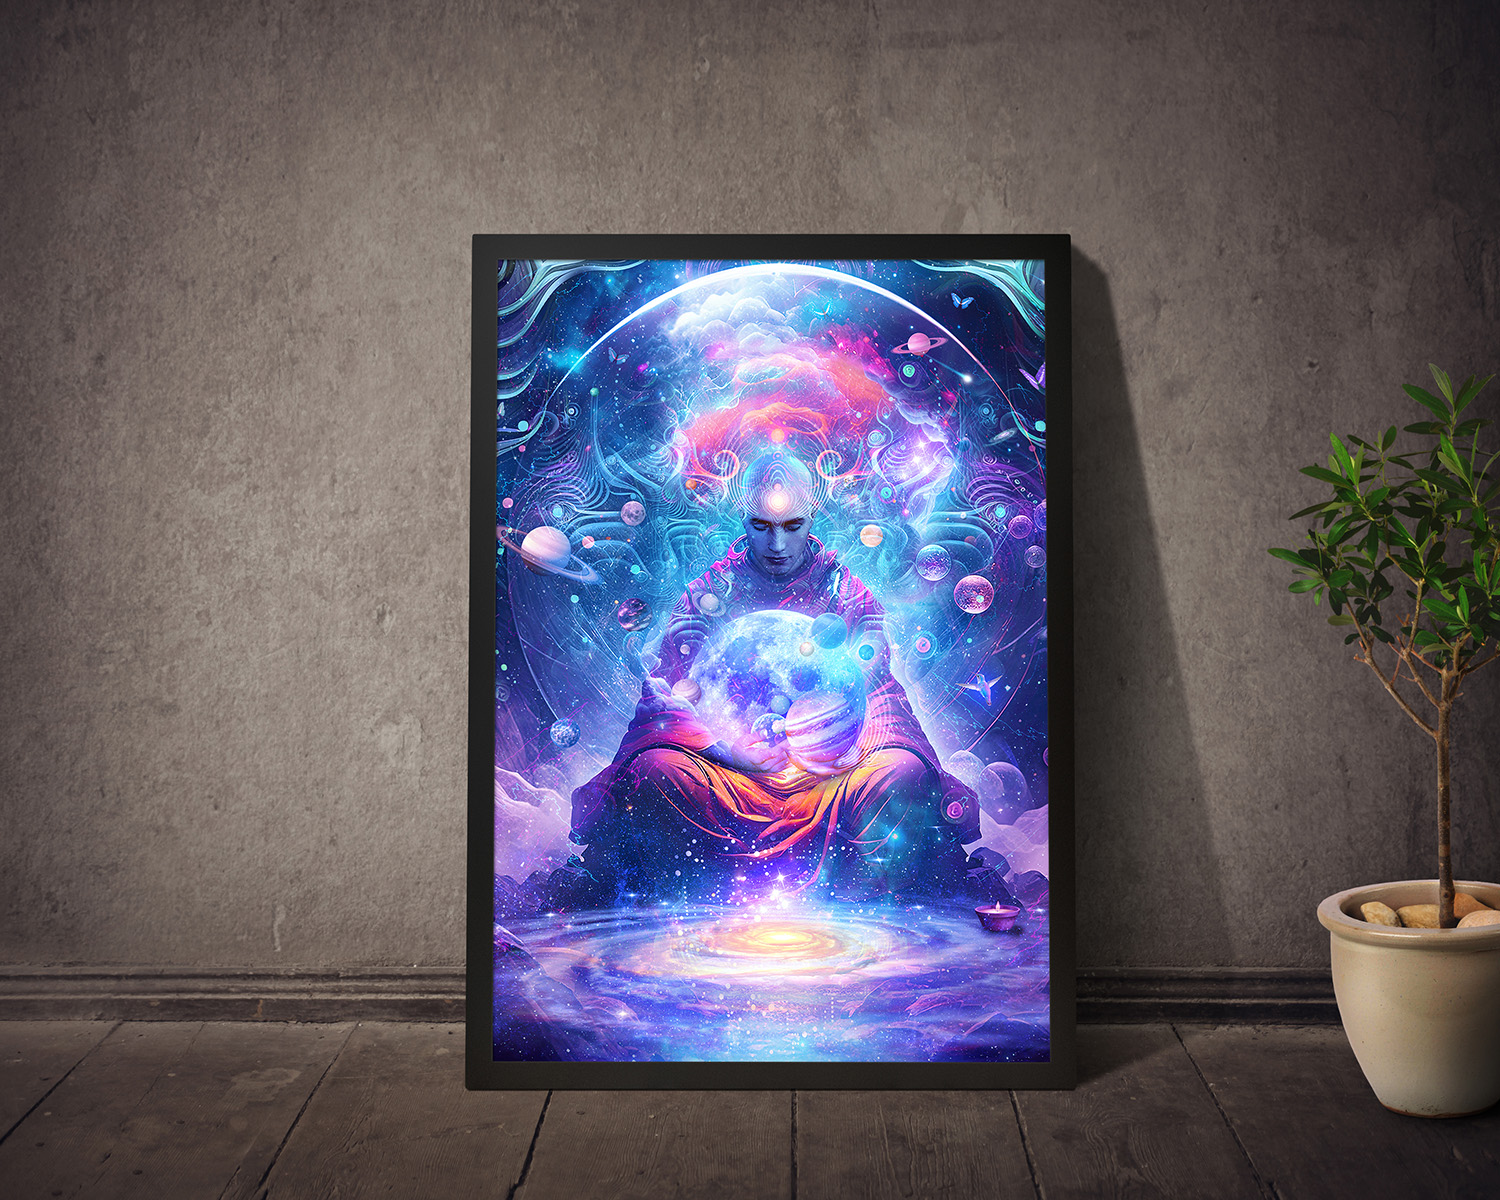 Fantasy framed wall art titled "From Other Worlds" by Cameron Gray, the artwork shows a cosmic spiritual enlightenment meditating buddhist holding fantasy planets